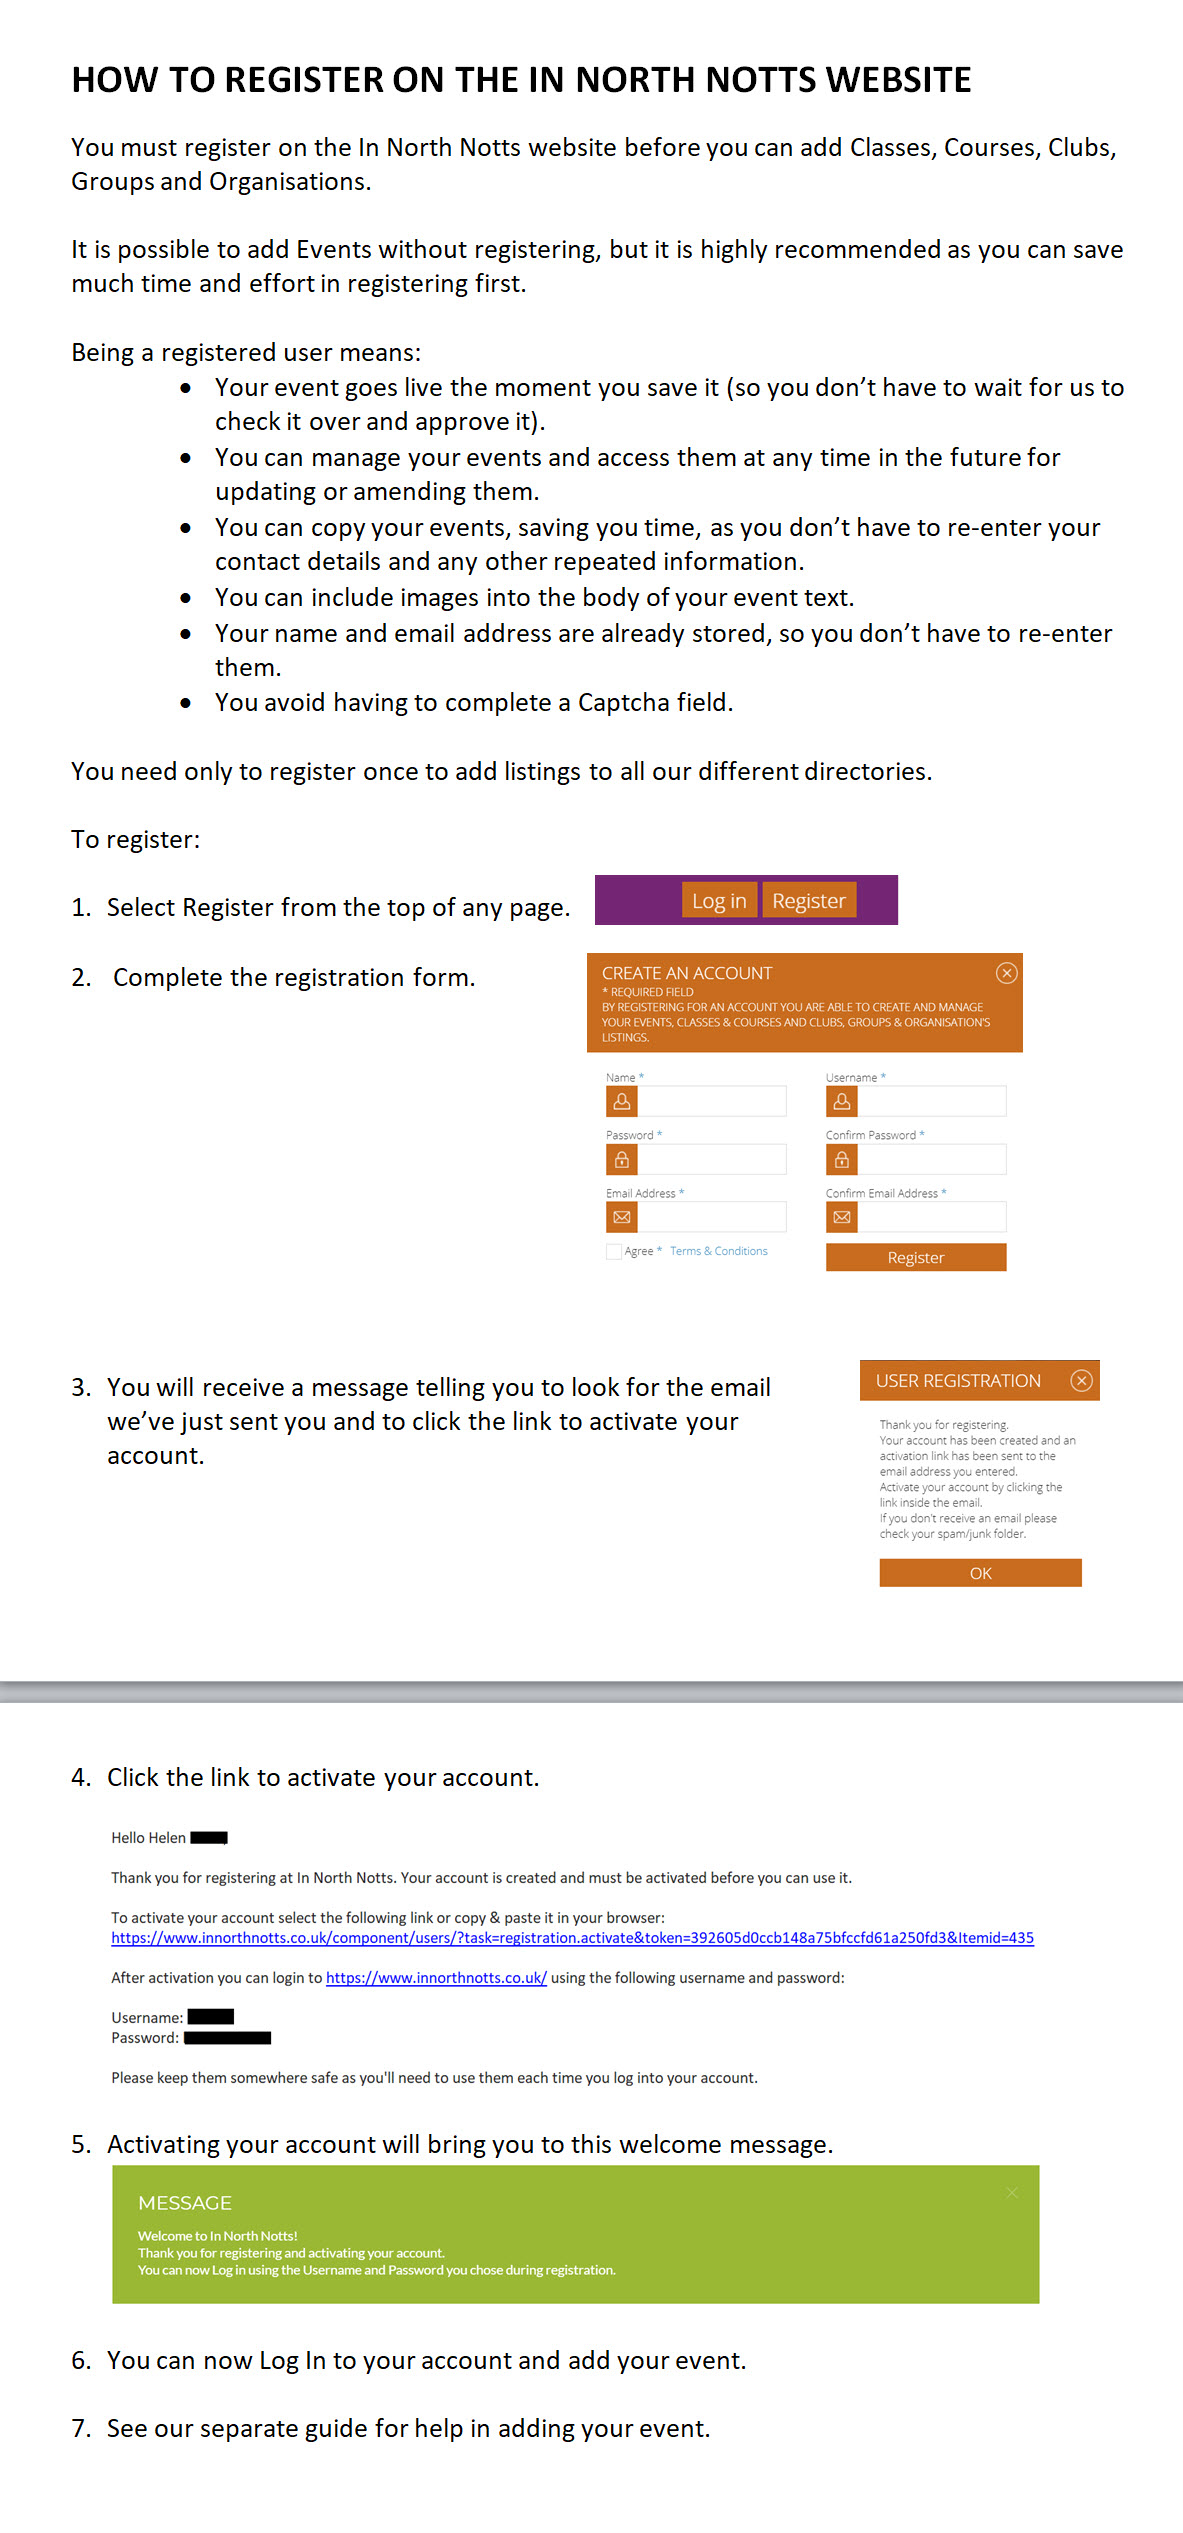 6.  How to Register on the 'In North Notts' Website